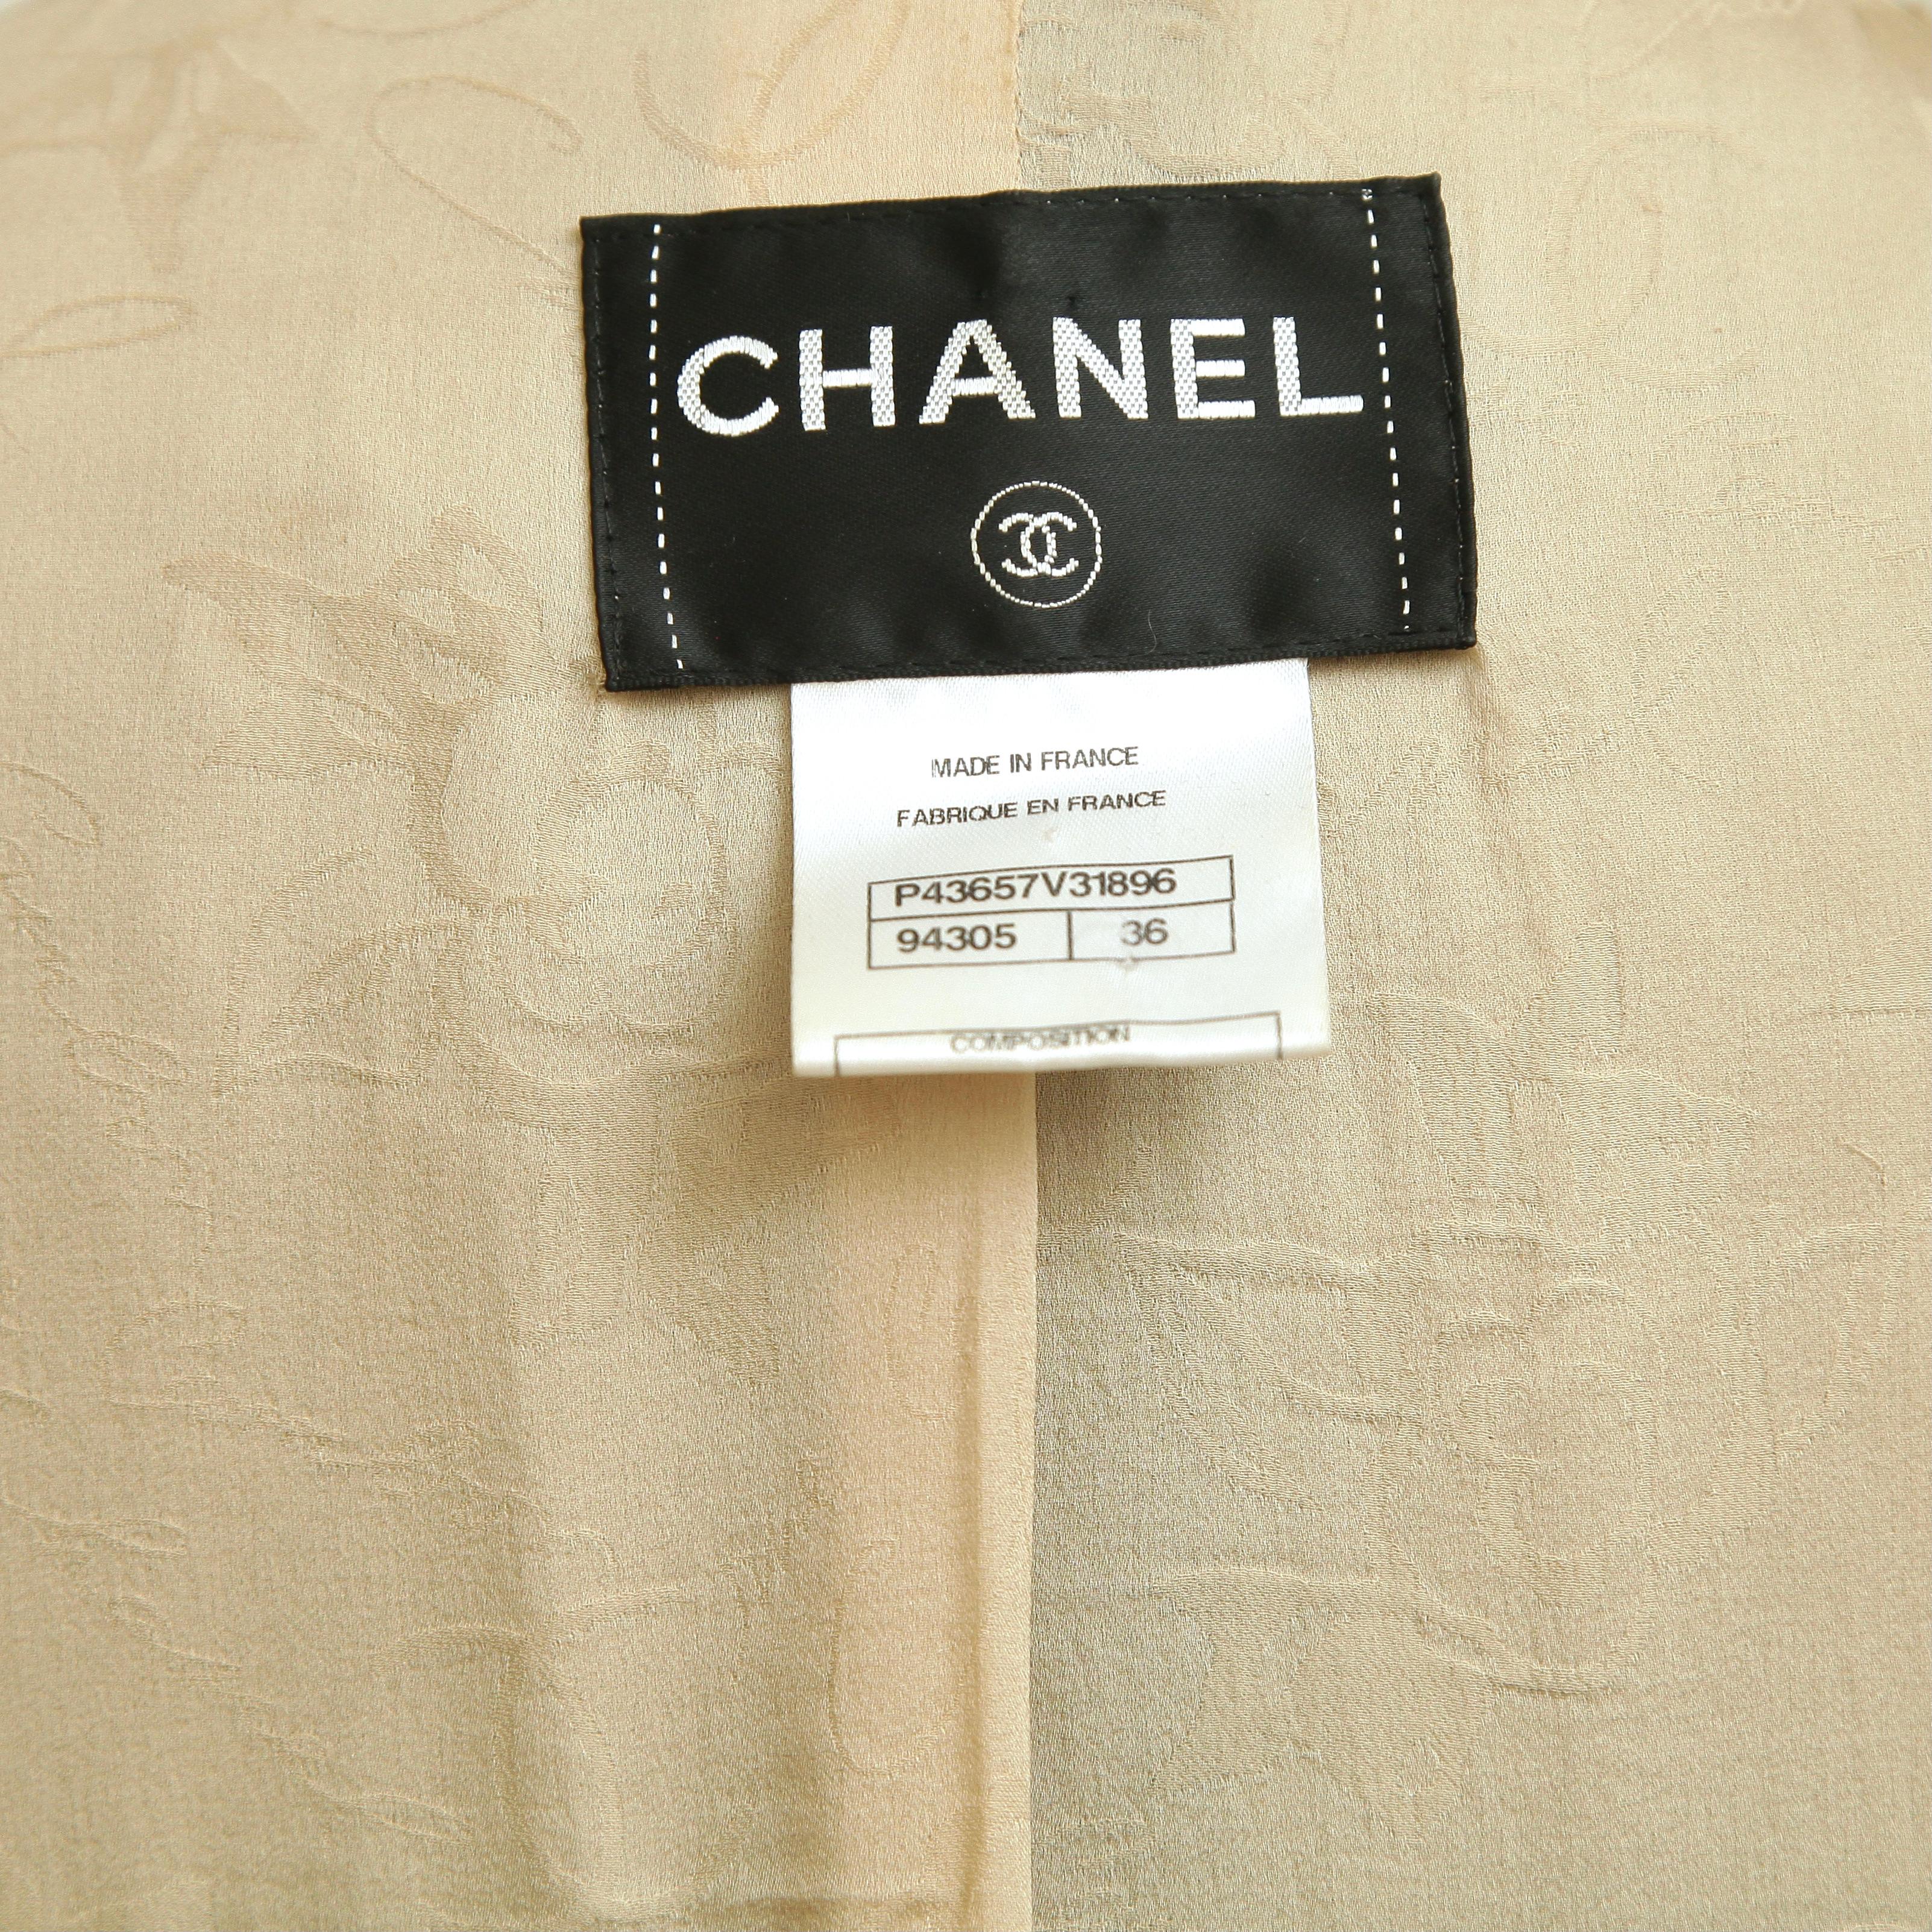 CHANEL Black Tweed Jacket Fantasy Hook Eye Buttons Pockets Gold Chain Sz 36 2012 For Sale 2